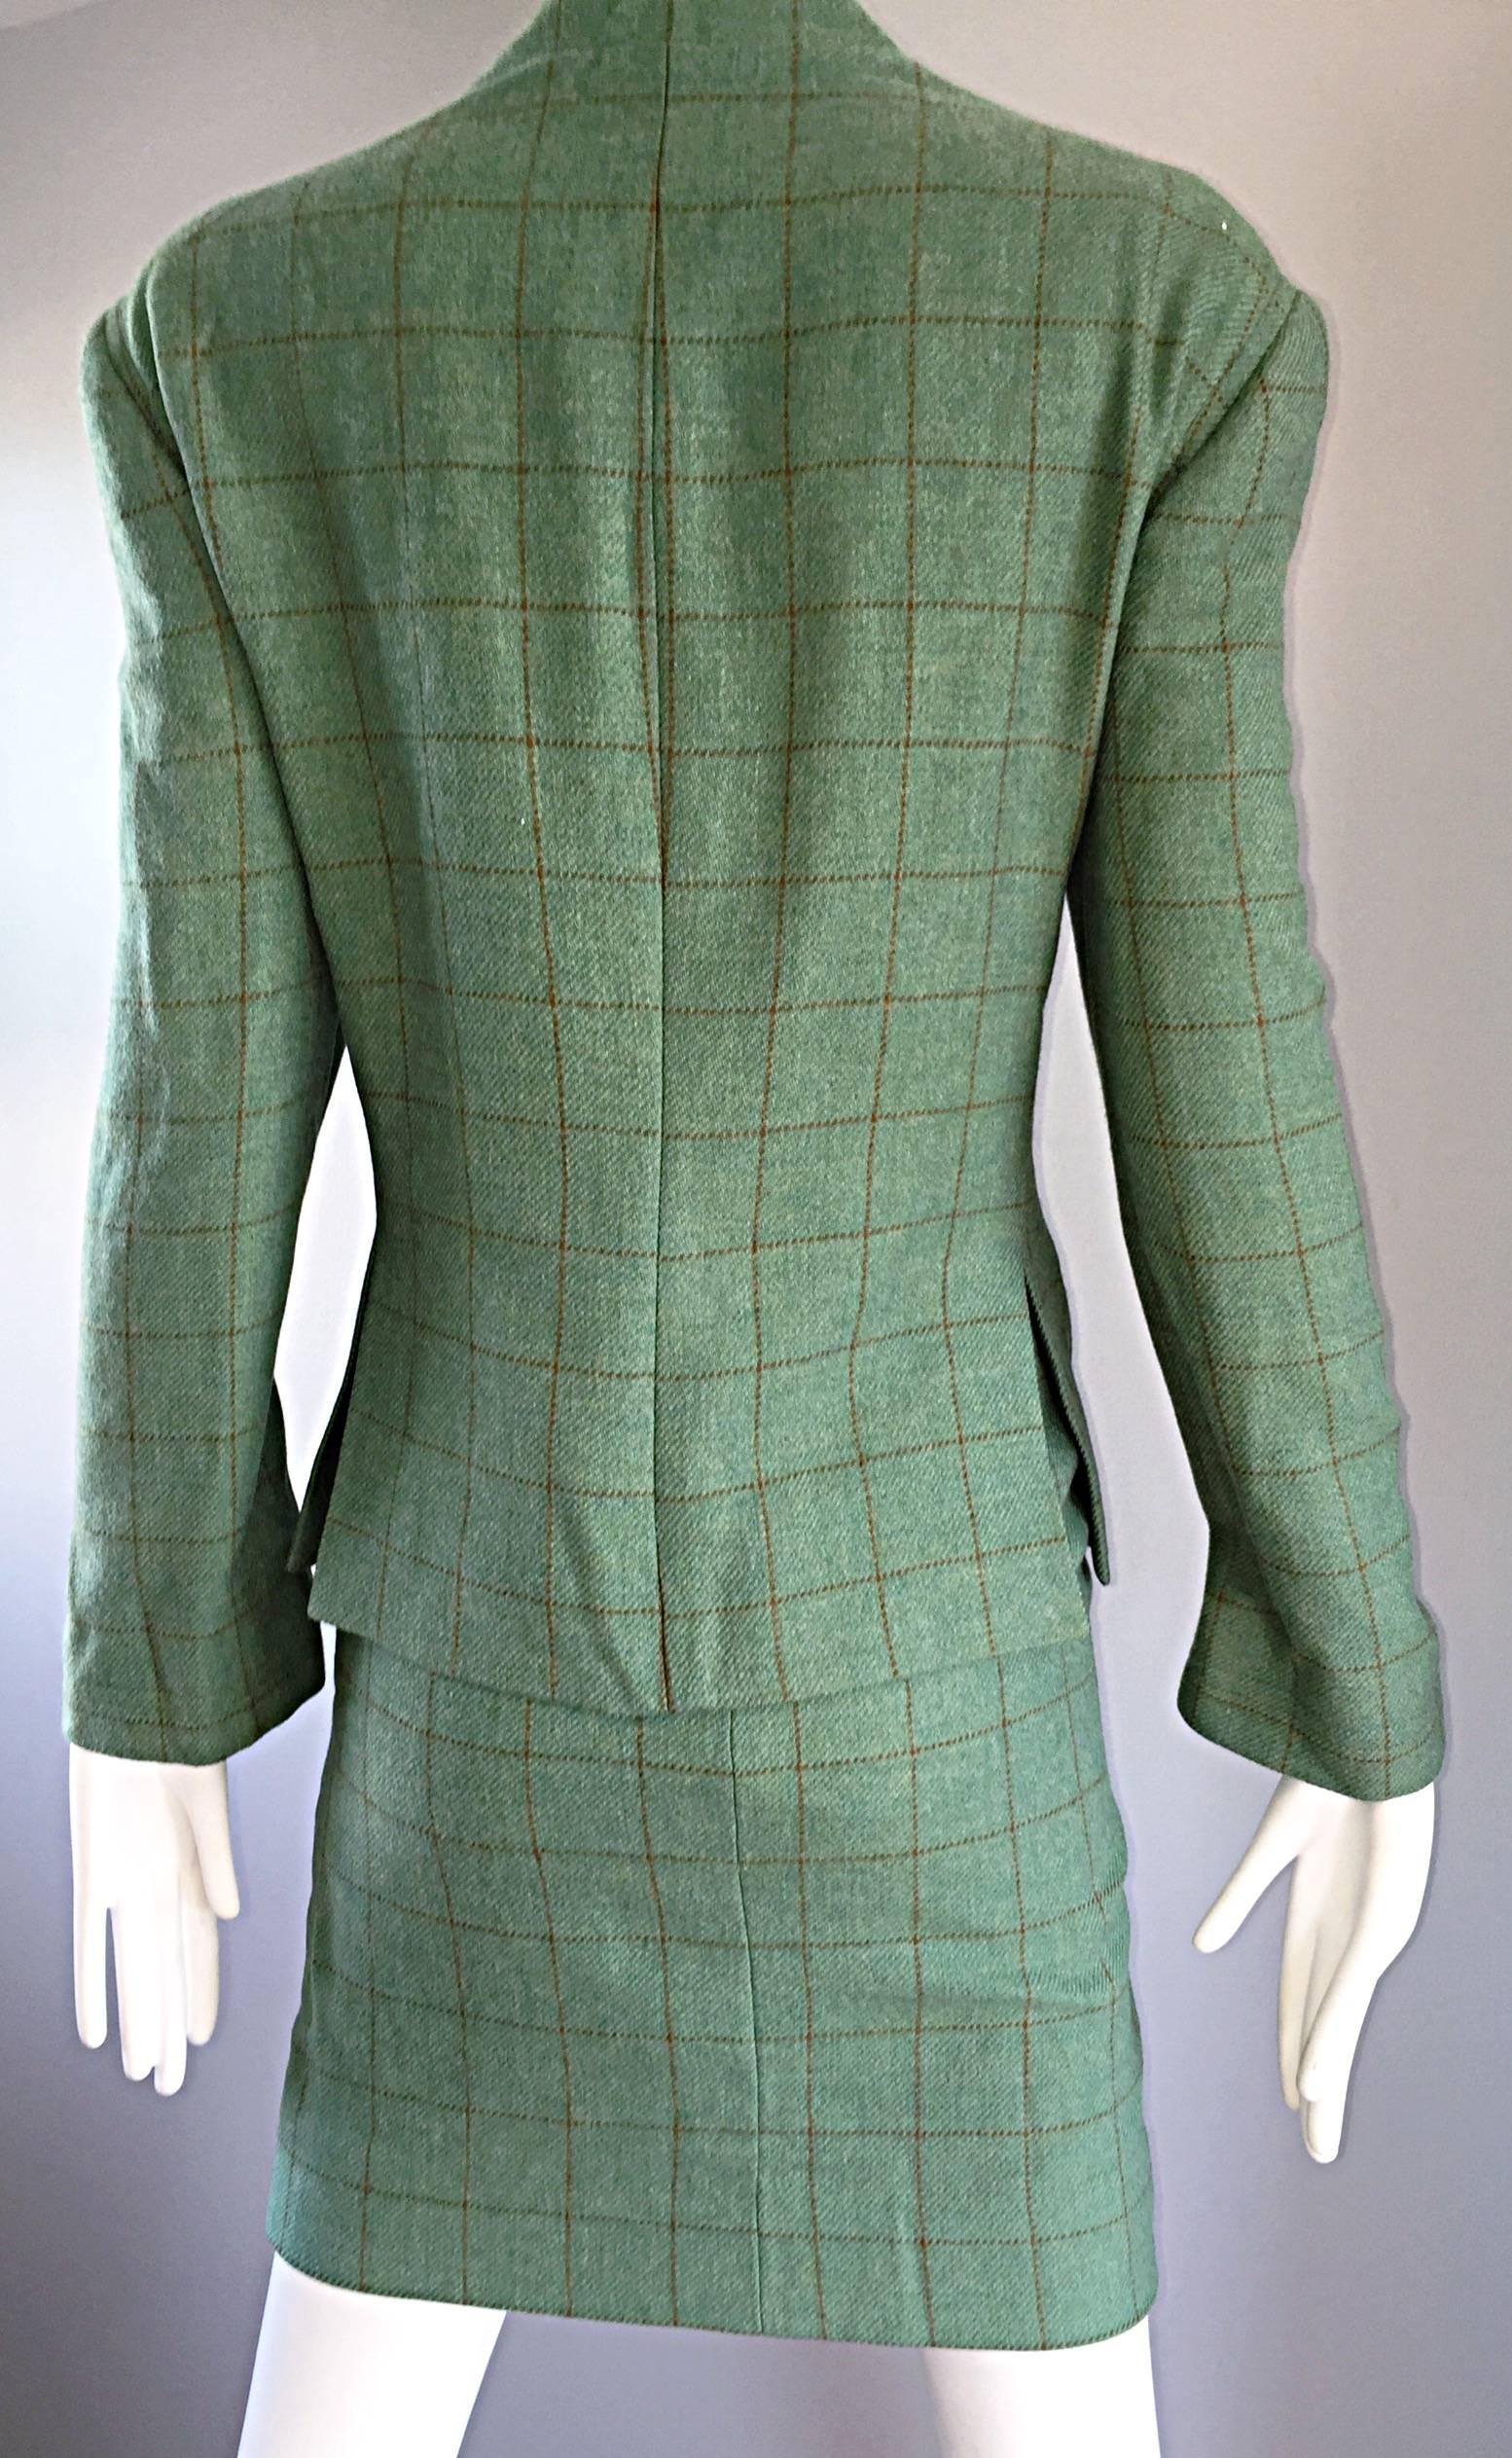 Women's Vintage Isaac Mizrahi Green and Brown Wool + Leather Asian Inspired Skirt Suit